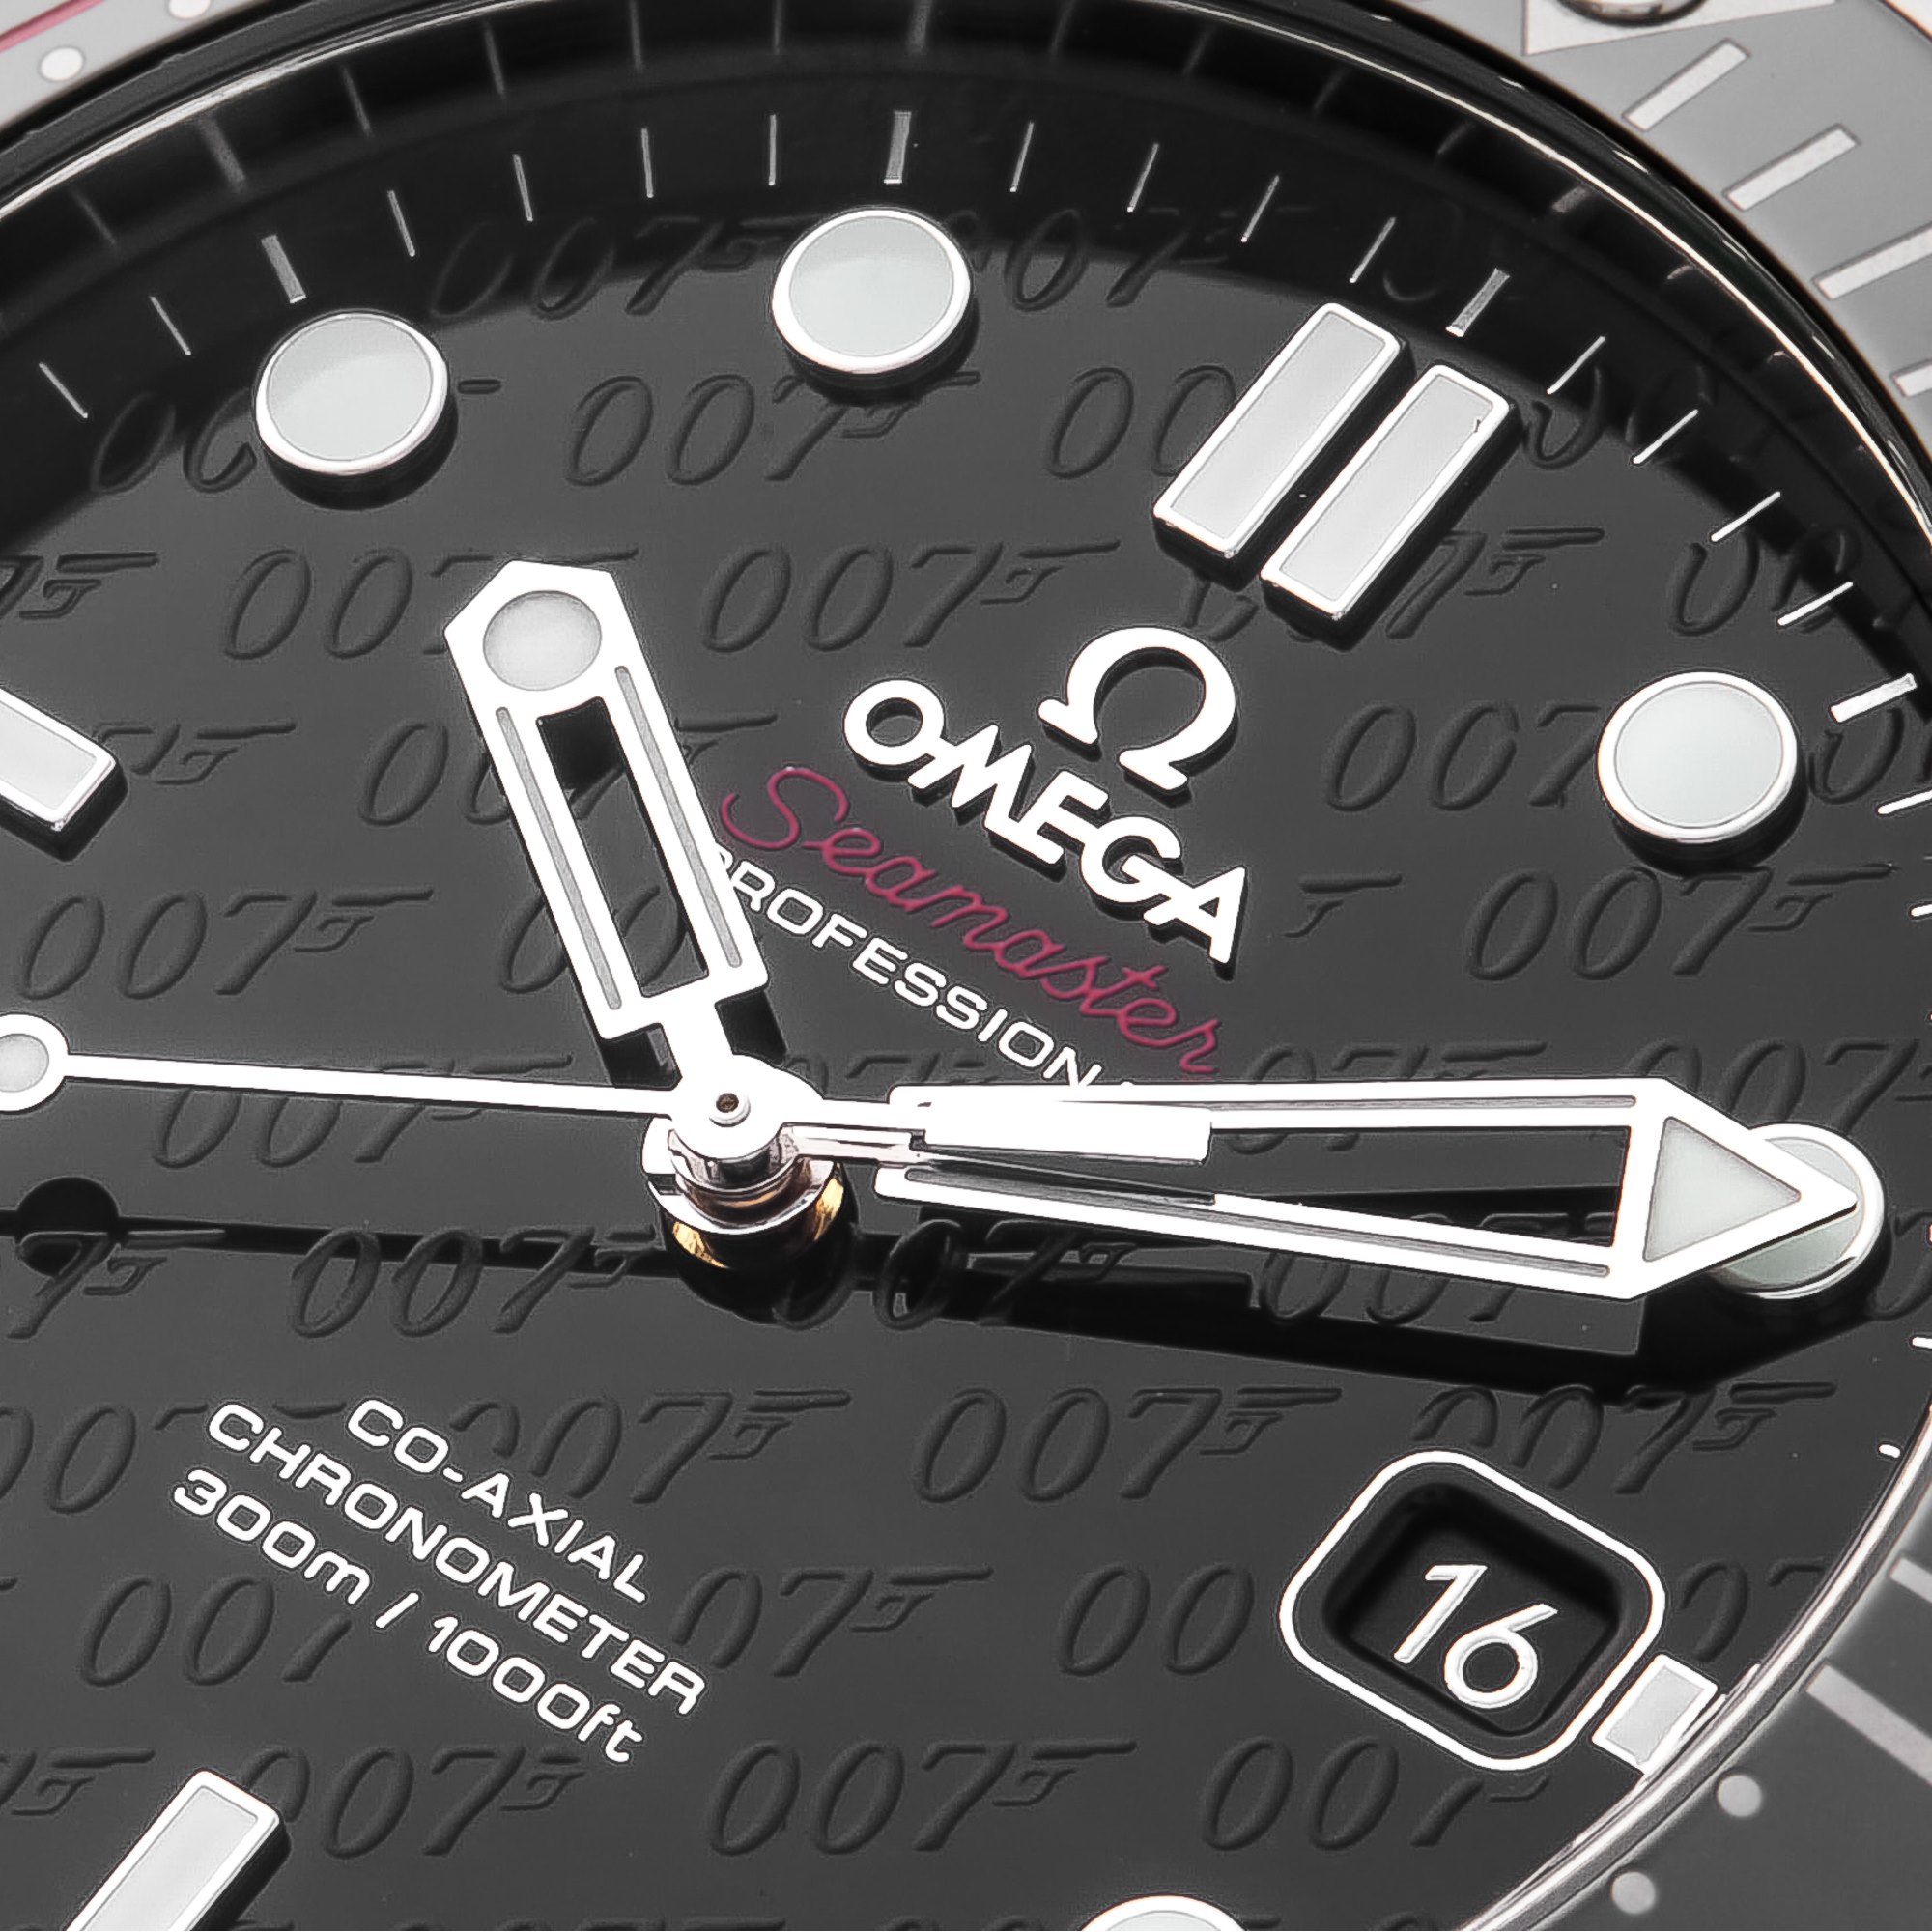 Omega Seamaster 300m James Bond Limited Edition to 11007 Pieces Stainless Steel 212.30.41.20.01.005